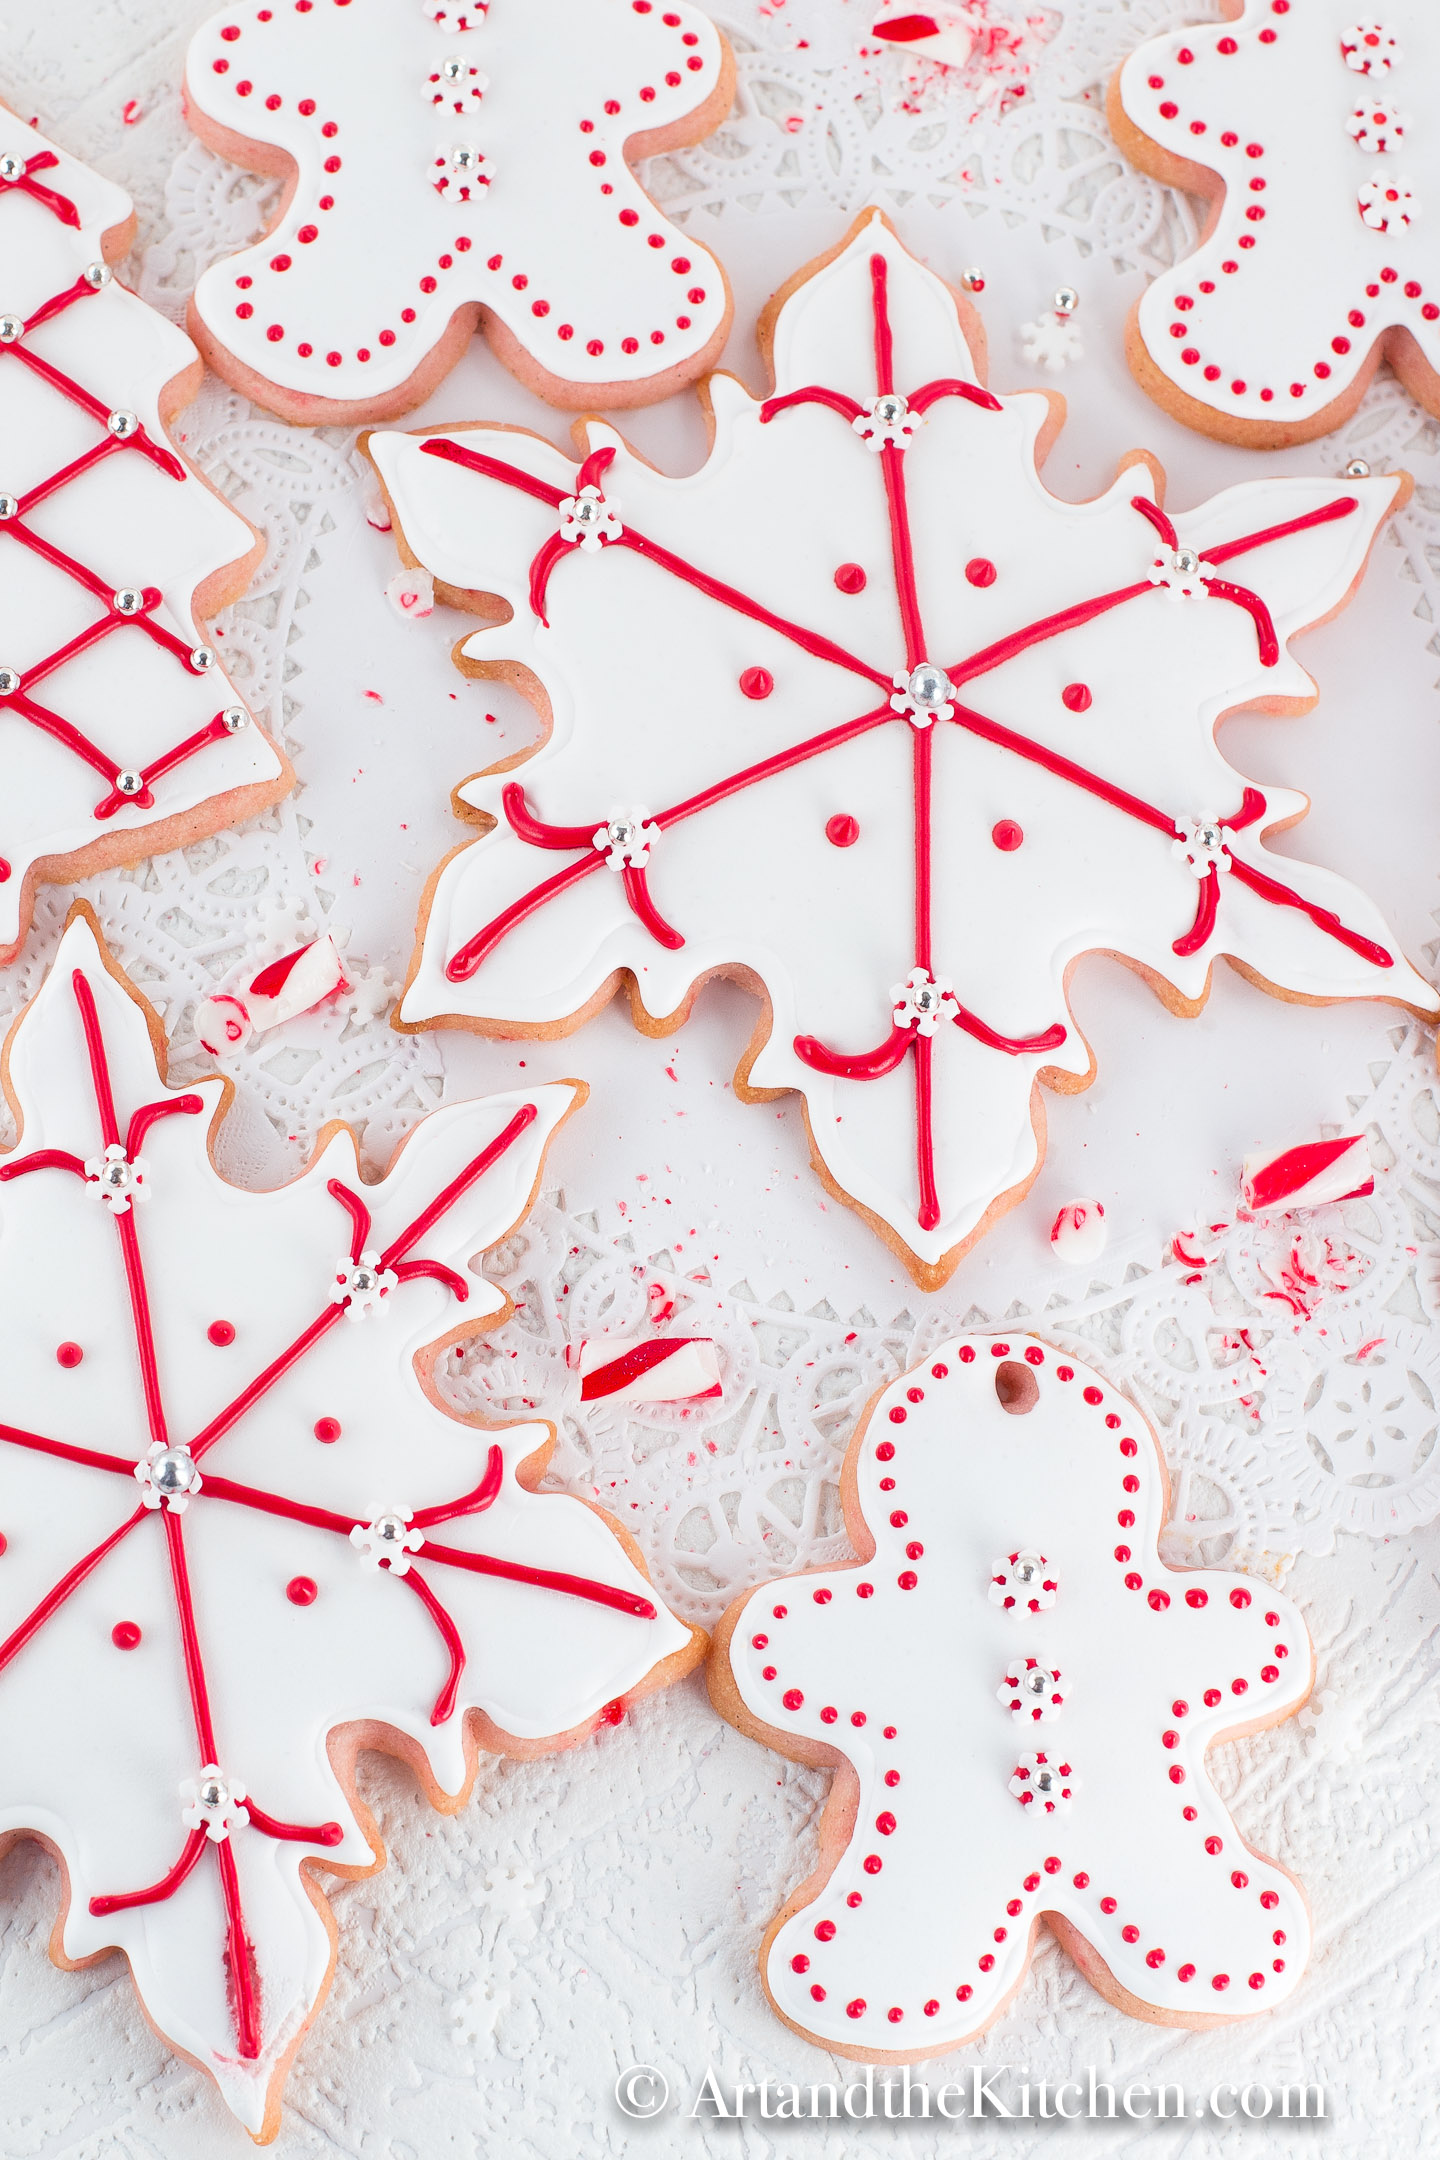 Sugar cookies cut into snowflake and gingerbread men shapes, coated with white royal icing and decorated with red dots and lines.